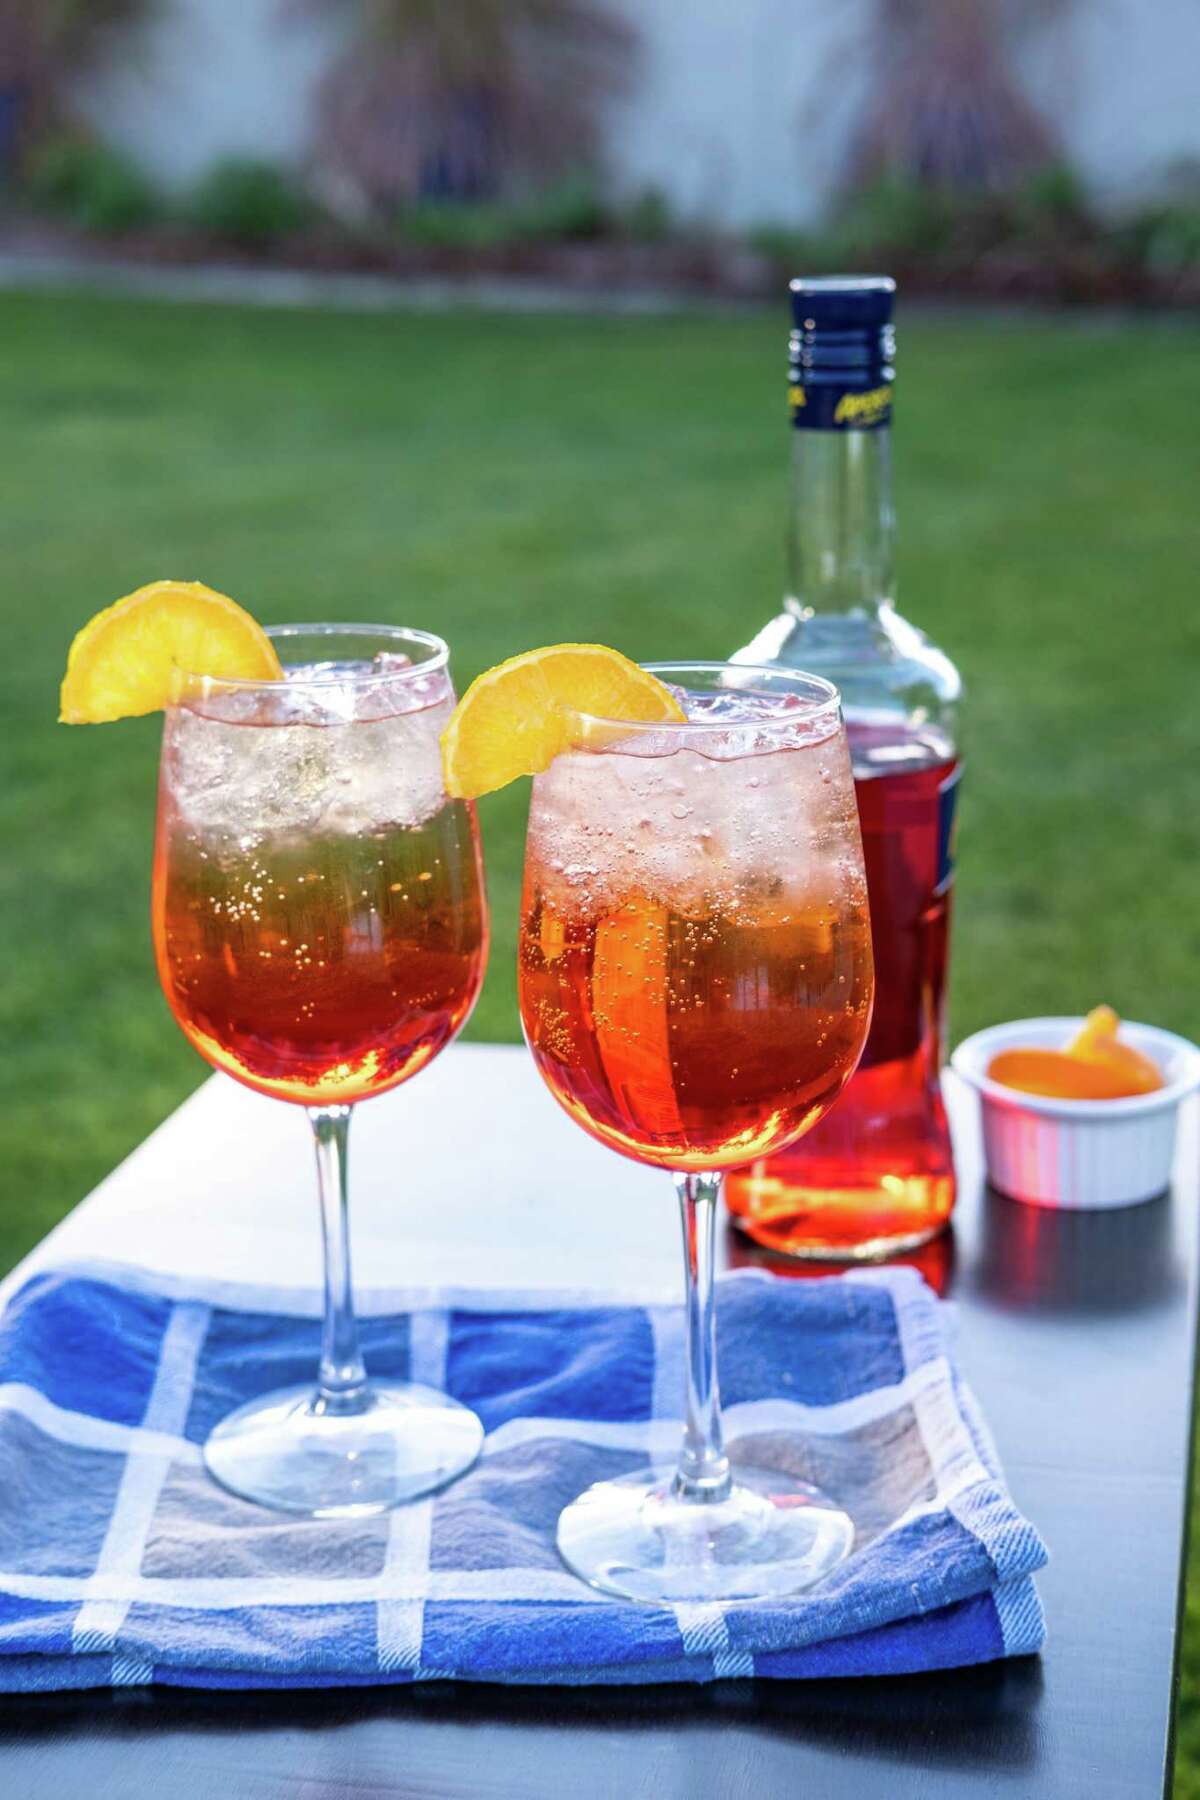 The Aperol Spritz from “The Hard Seltzer Cocktail Book: 55 Unofficial Recipes for White Claw Slushies, Truly Mixers, and More Spiked-Seltzer Drinks” (Ulysses Press) by Casie Vogel.